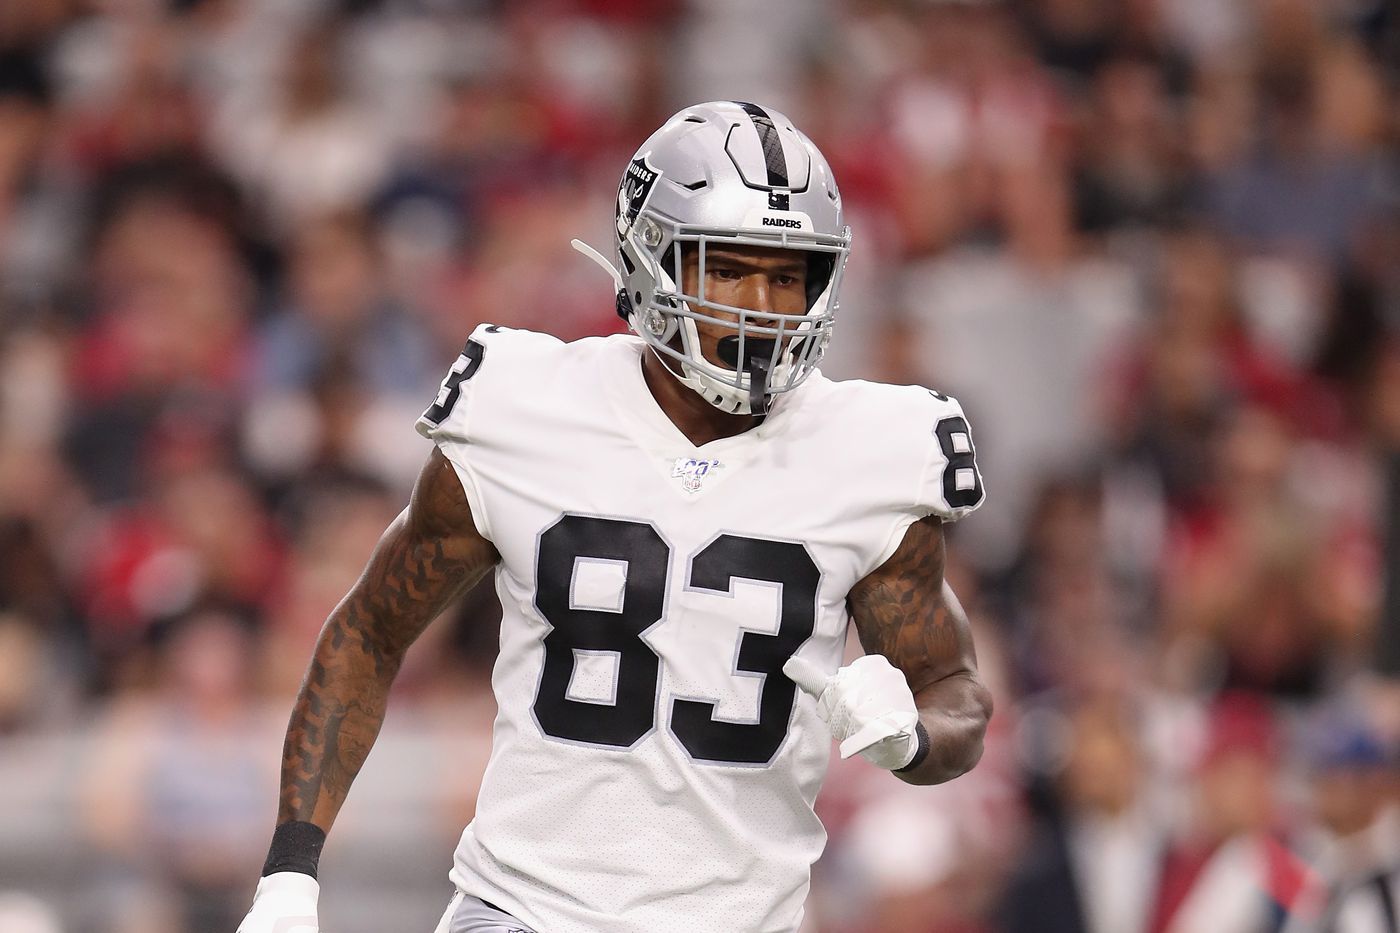 Darren Waller is a Raiders cheat code at TE, if he can stay on the field